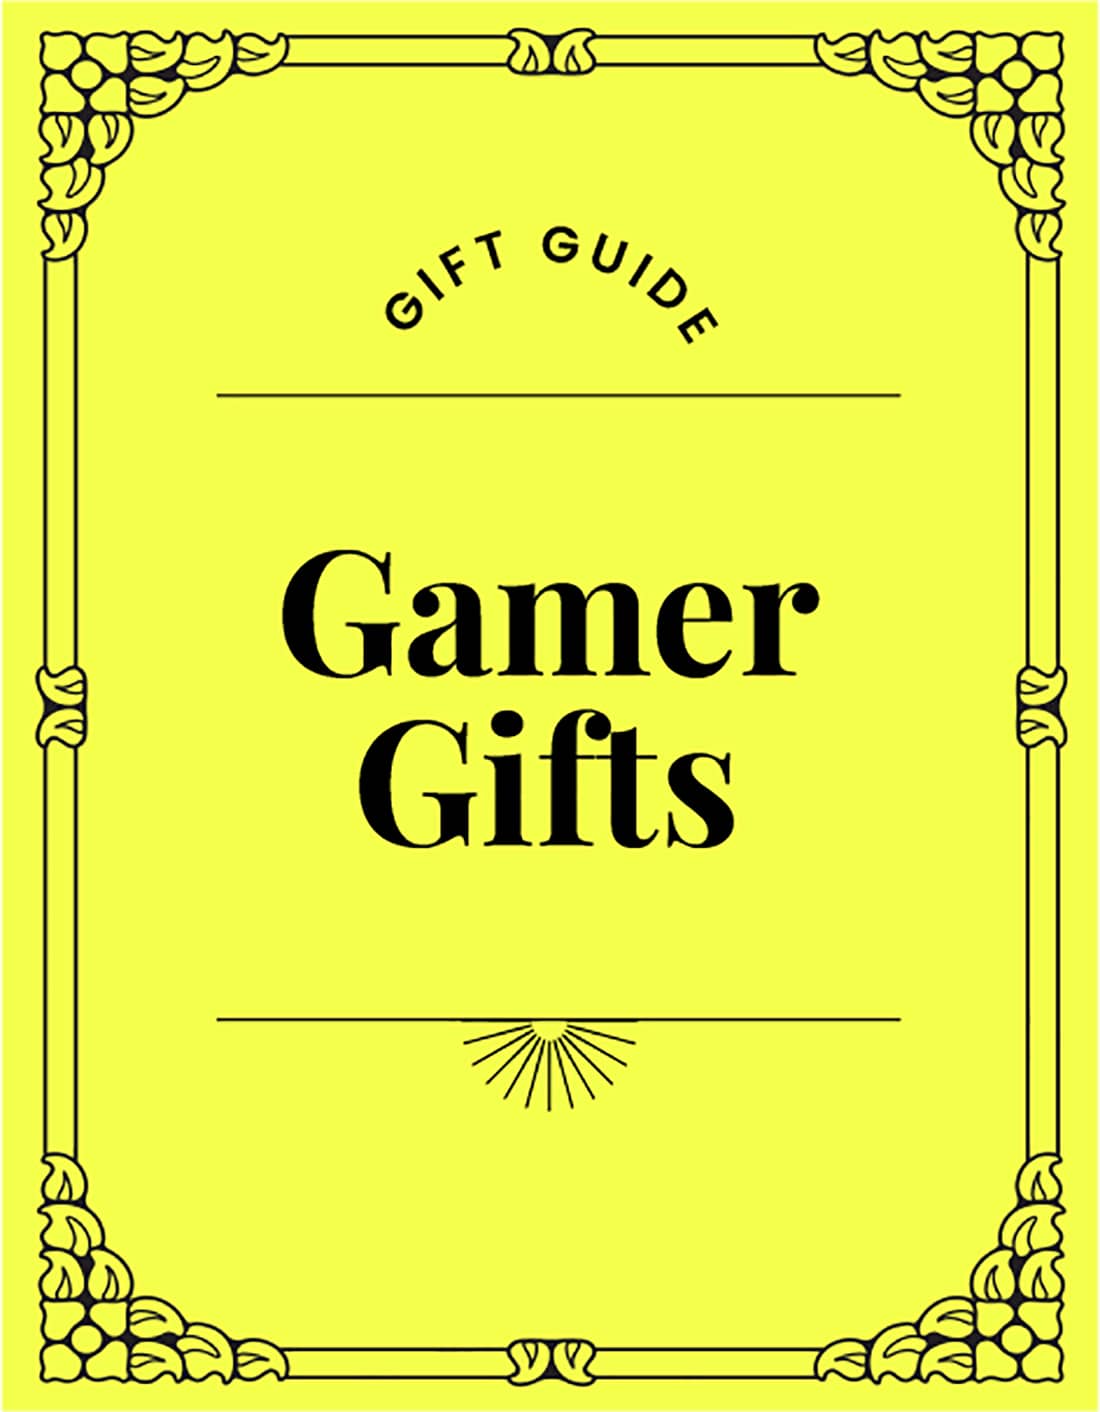 Gift Guide. Gamer Gifts